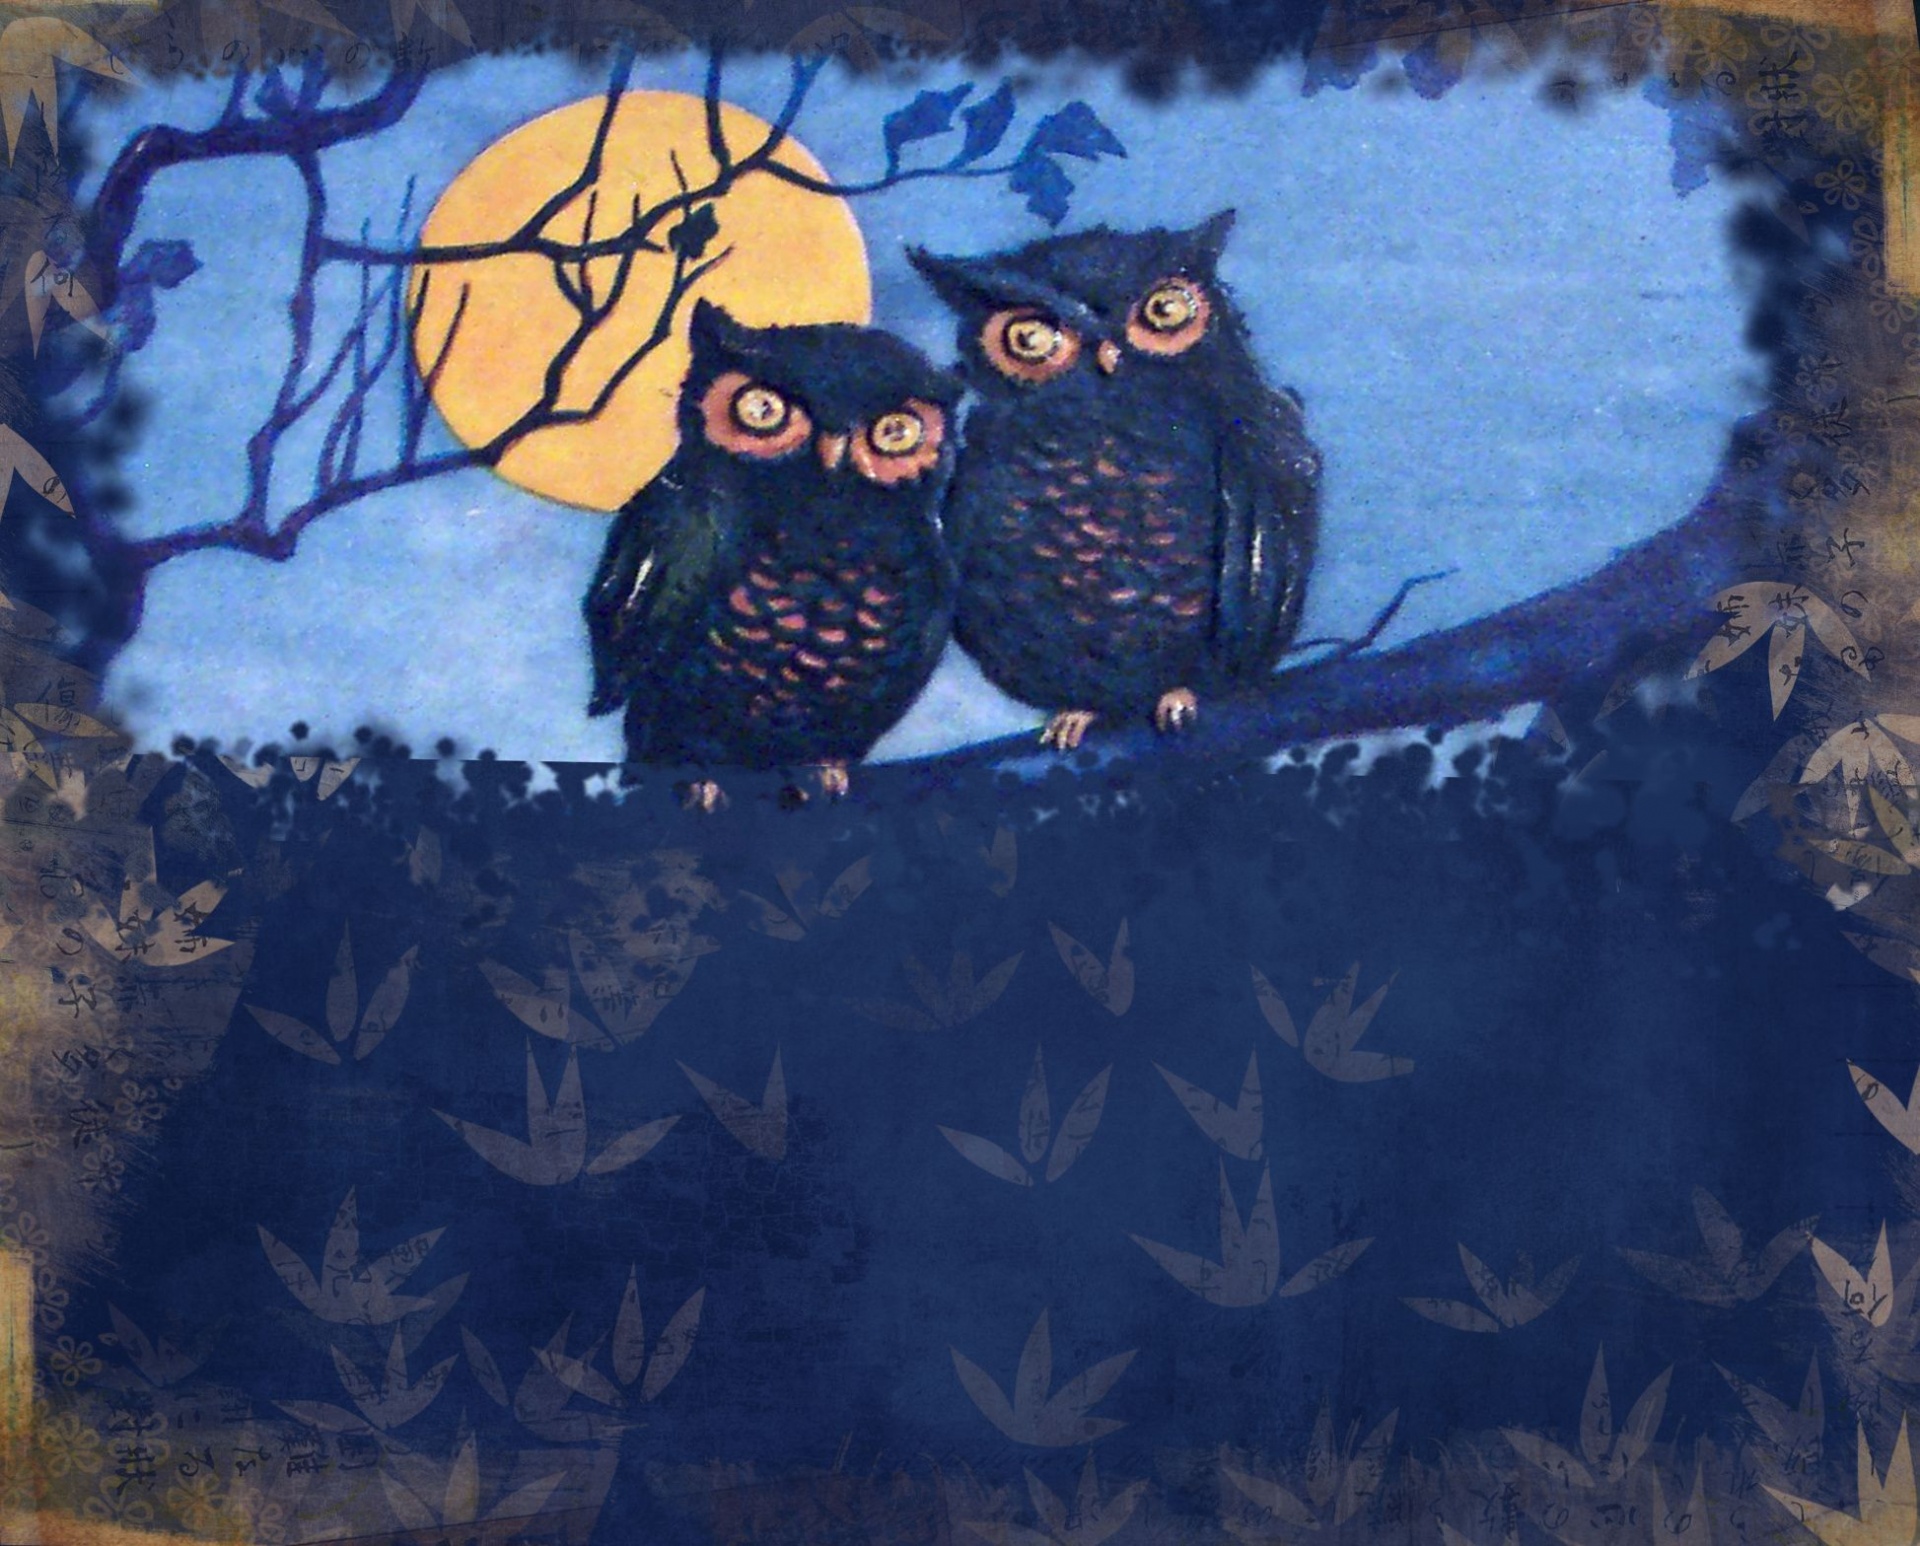 retro illustration of owls with a full moon behind them